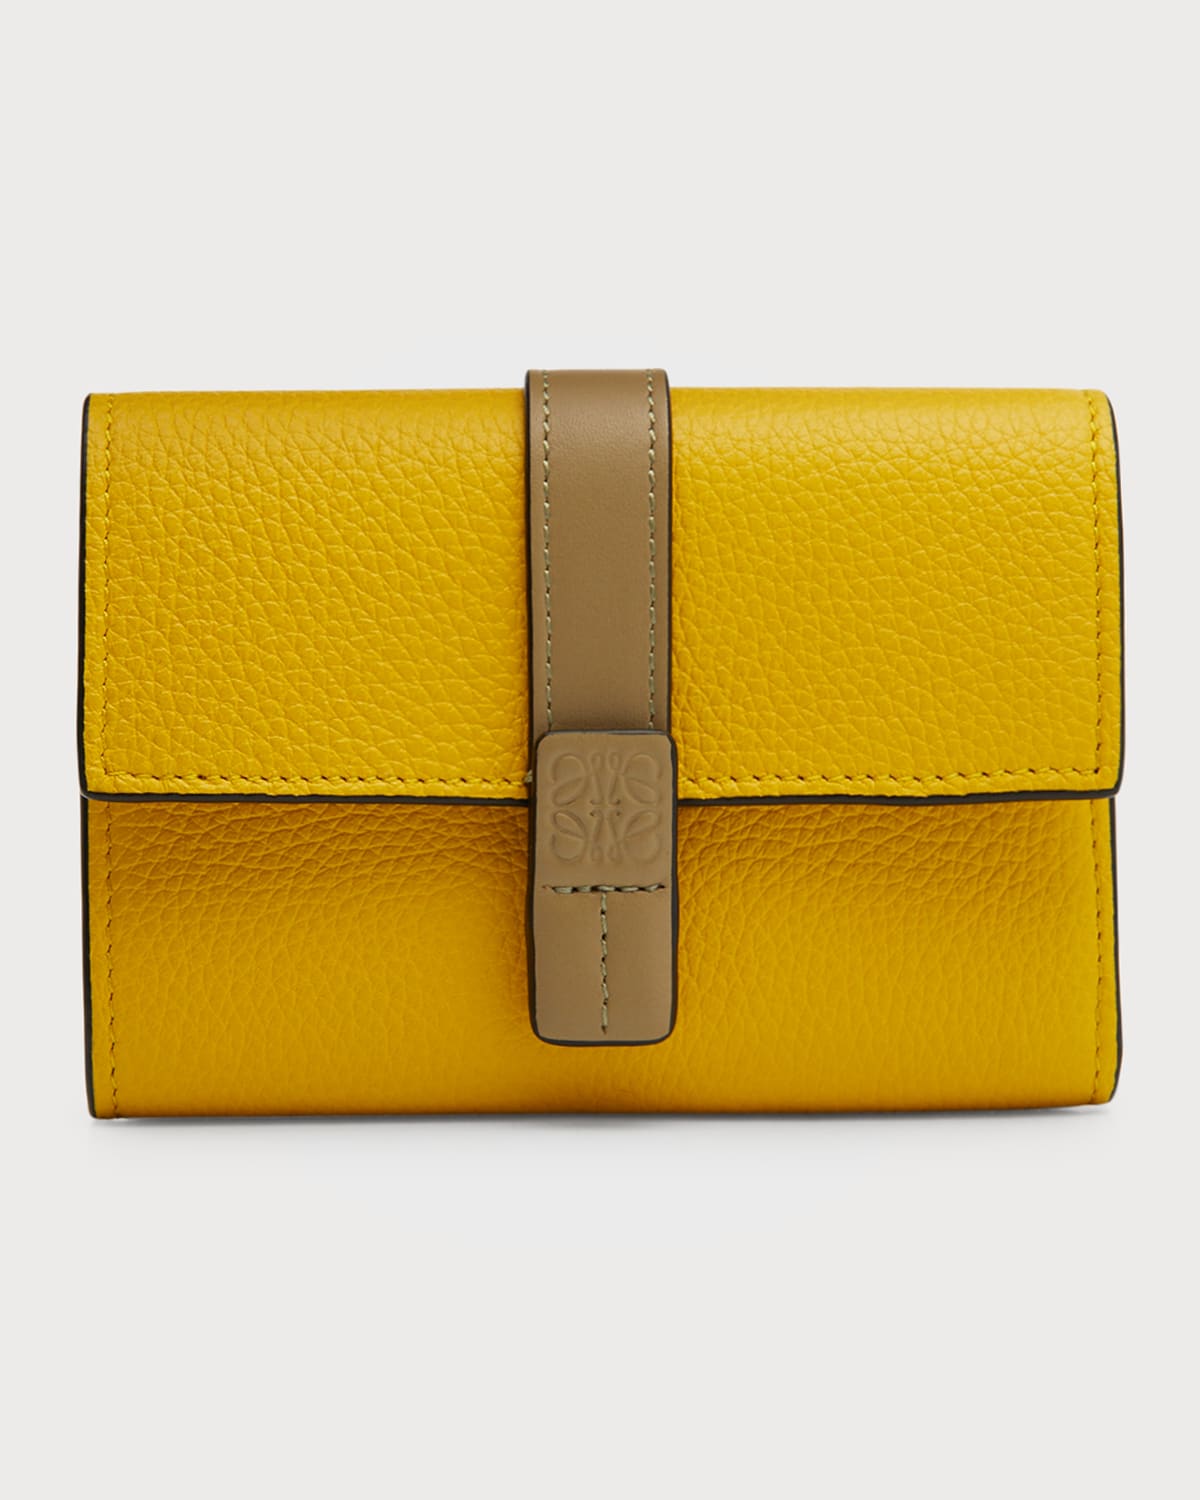 Loewe Small Trifold Flap Leather Wallet